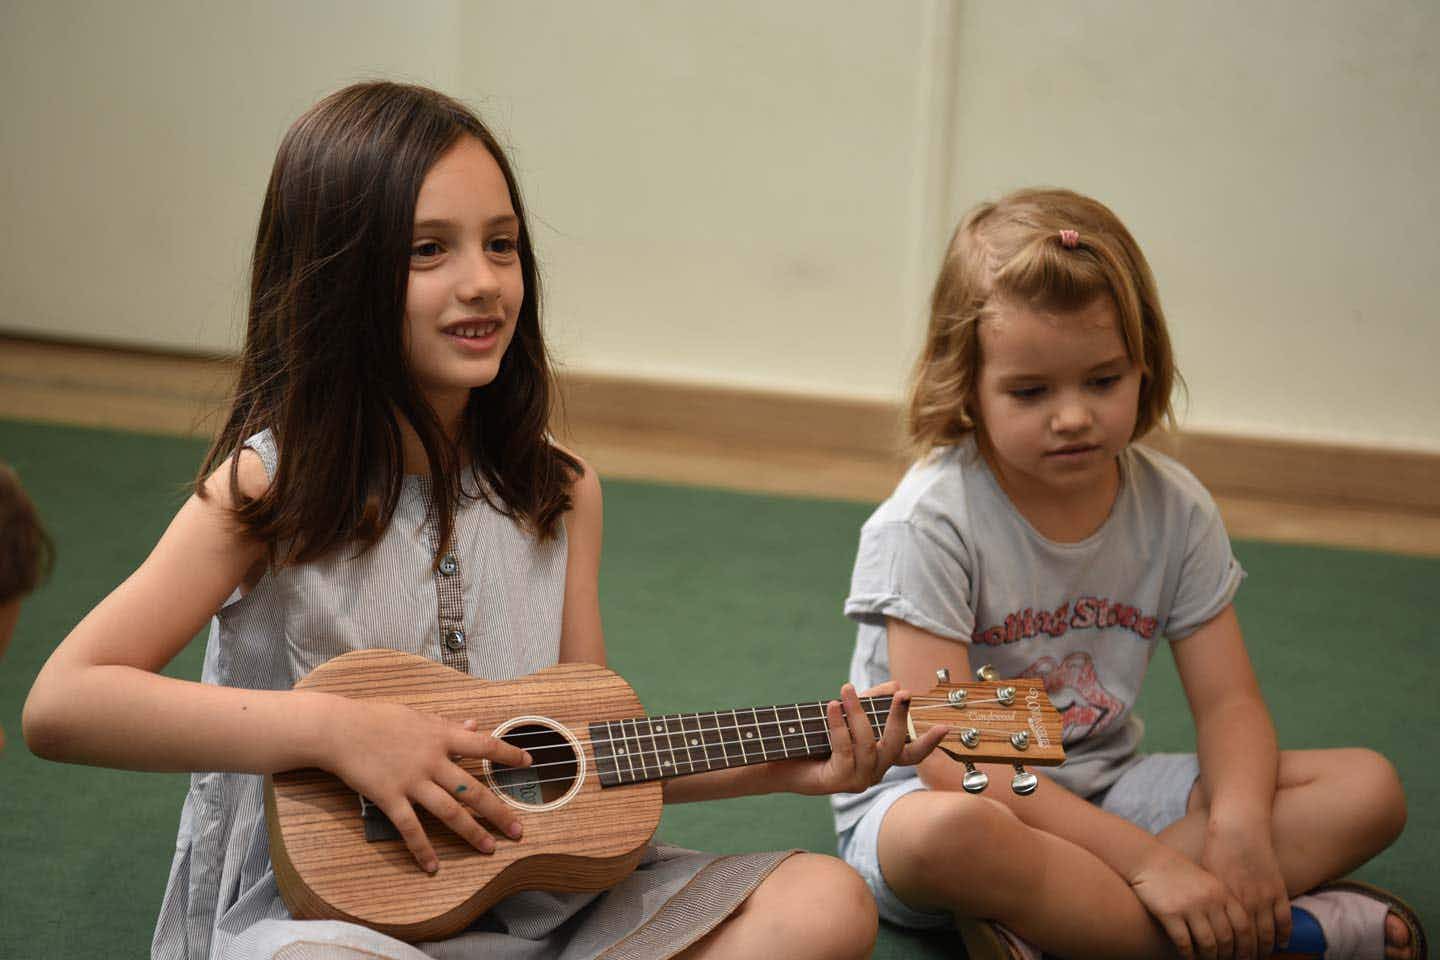 A 5-years-old girl play guitar in a music school classroom